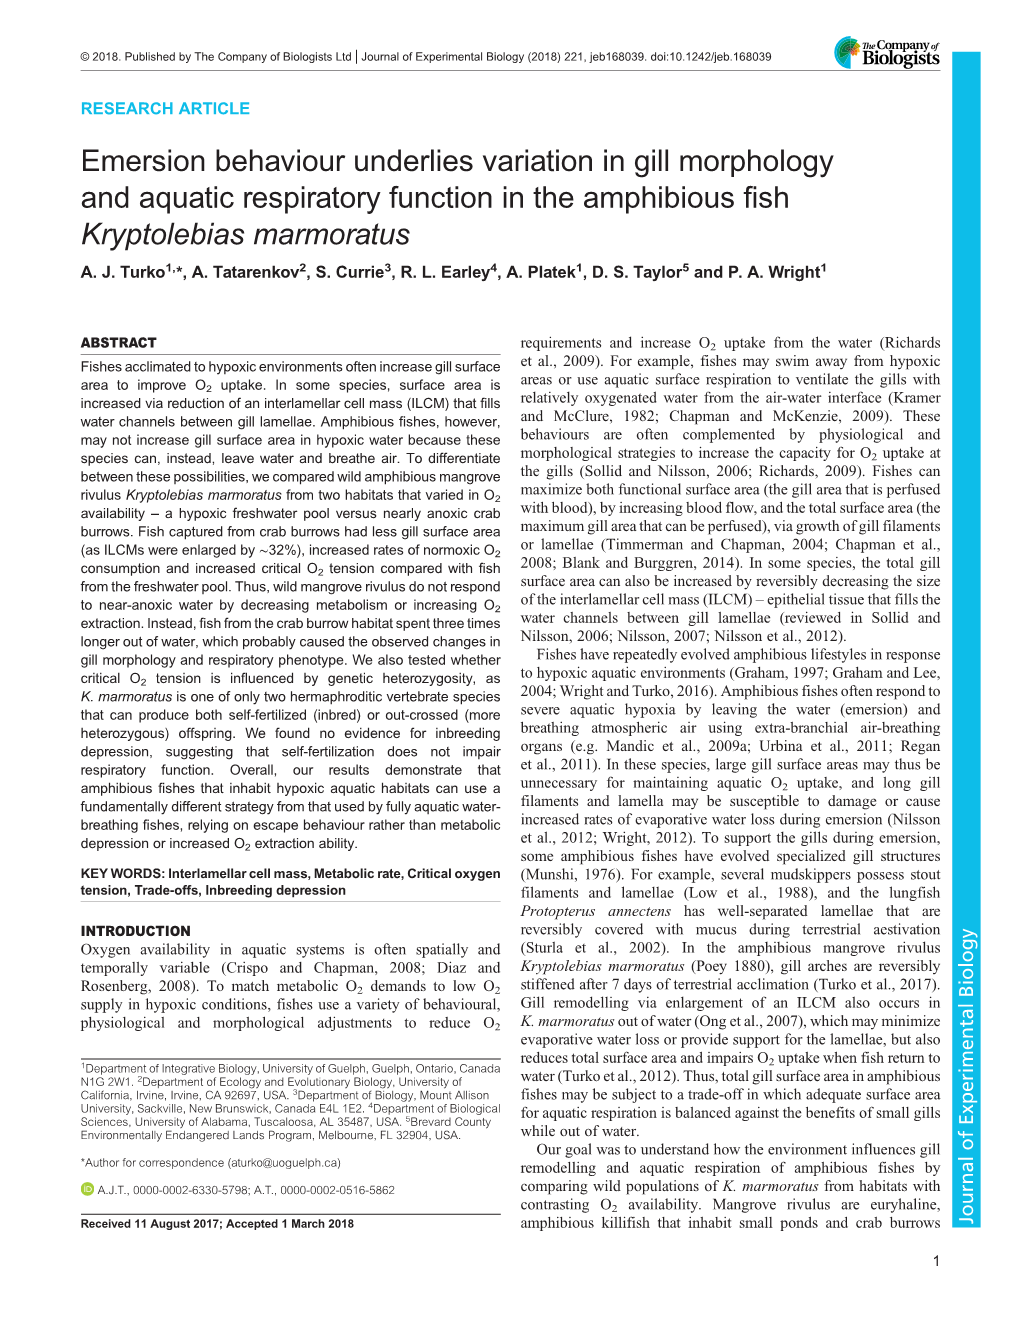 Emersion Behaviour Underlies Variation in Gill Morphology and Aquatic Respiratory Function in the Amphibious Fish Kryptolebias Marmoratus A